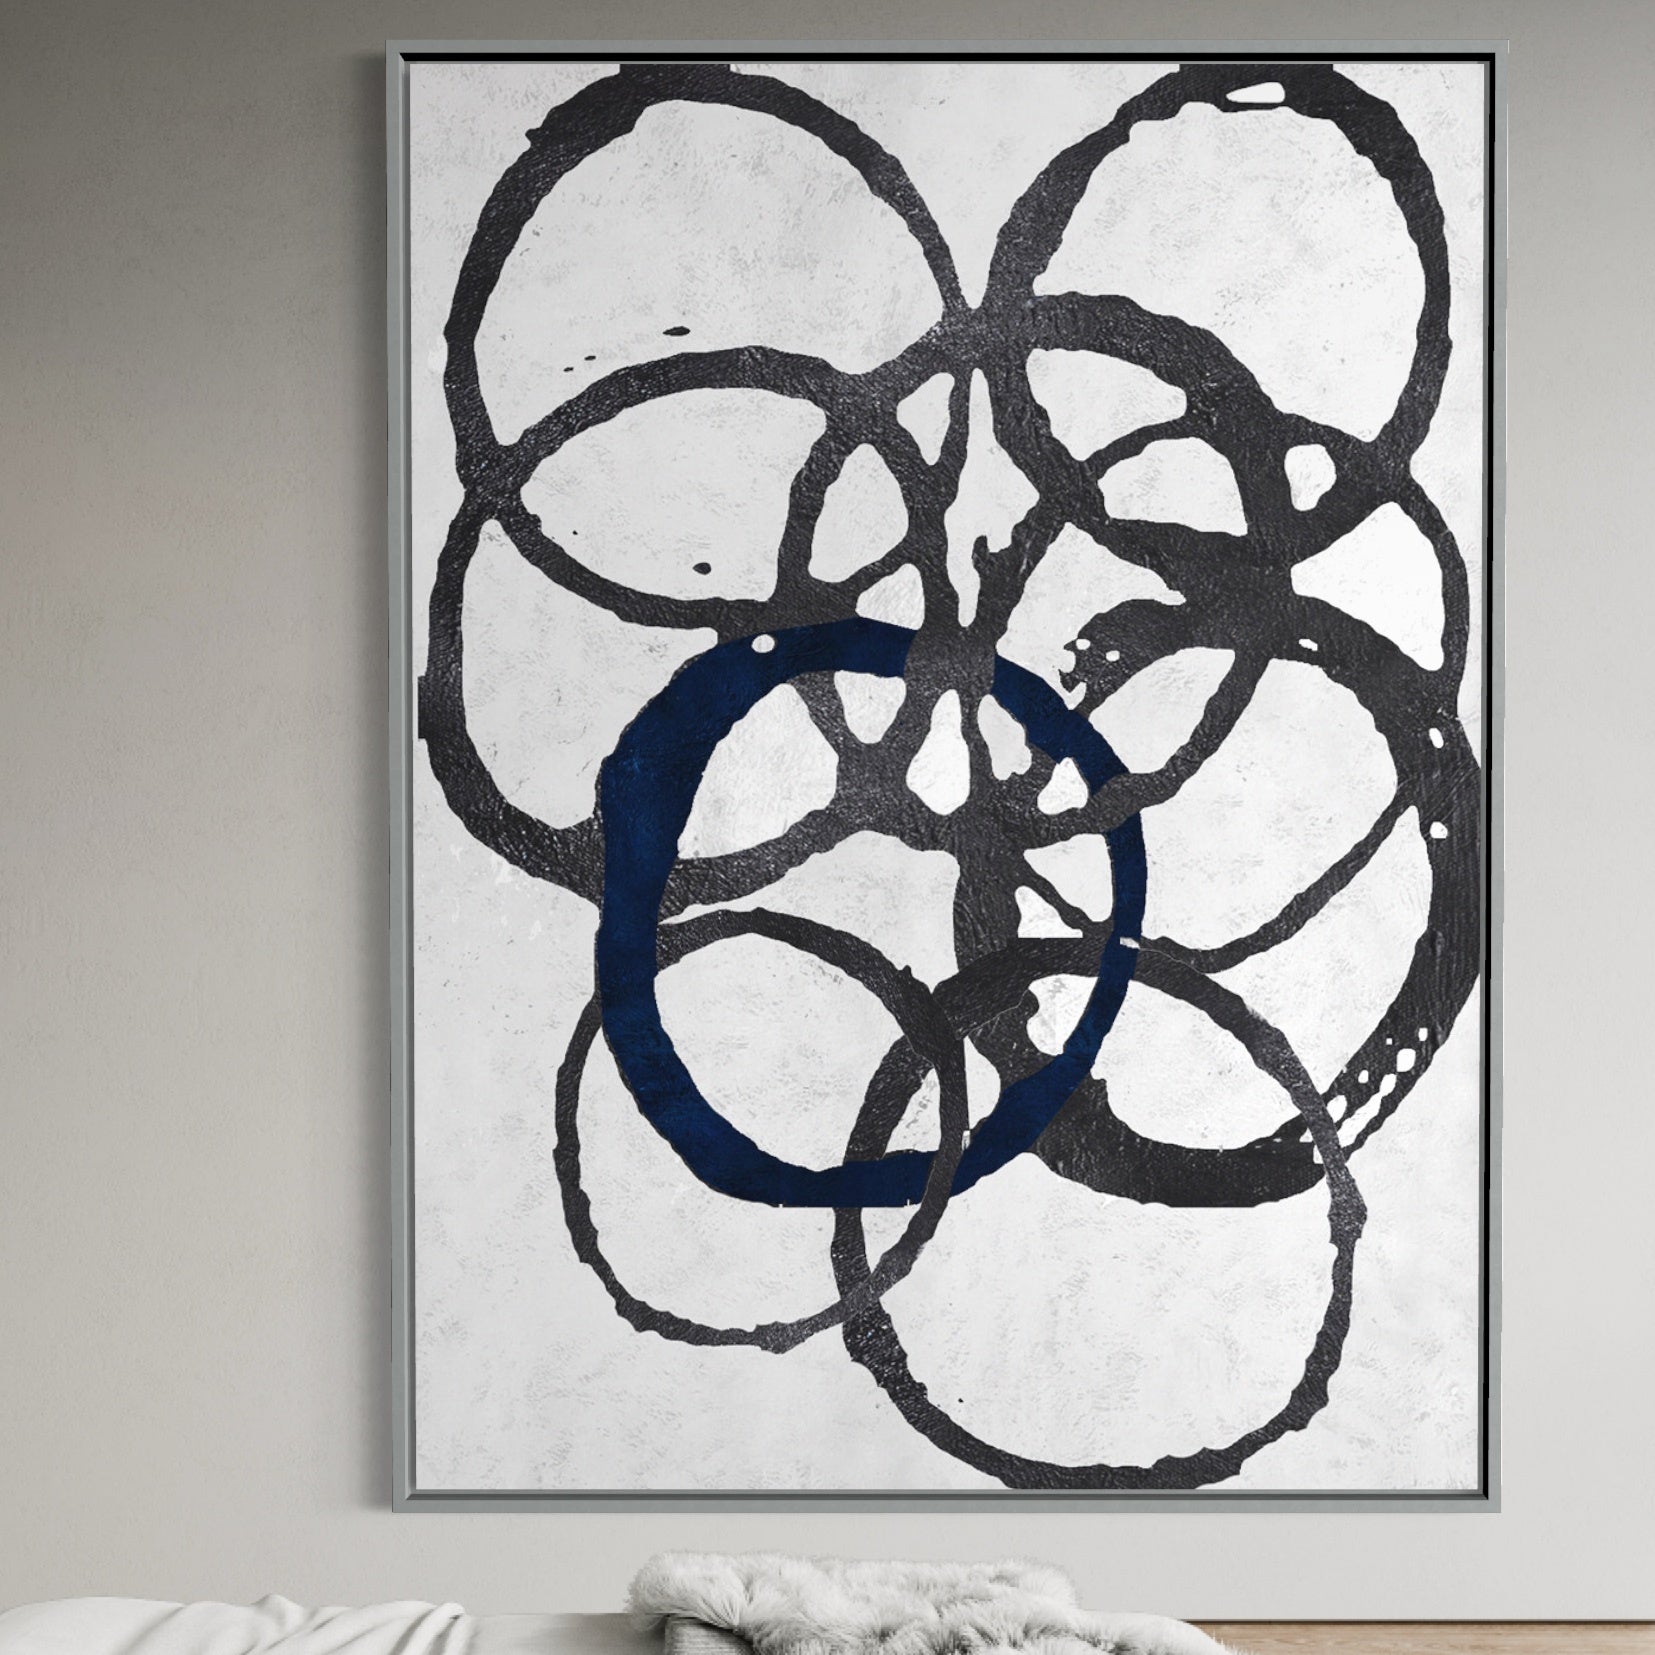 Circles And Charcoal, Black And Golden / 75x100cm